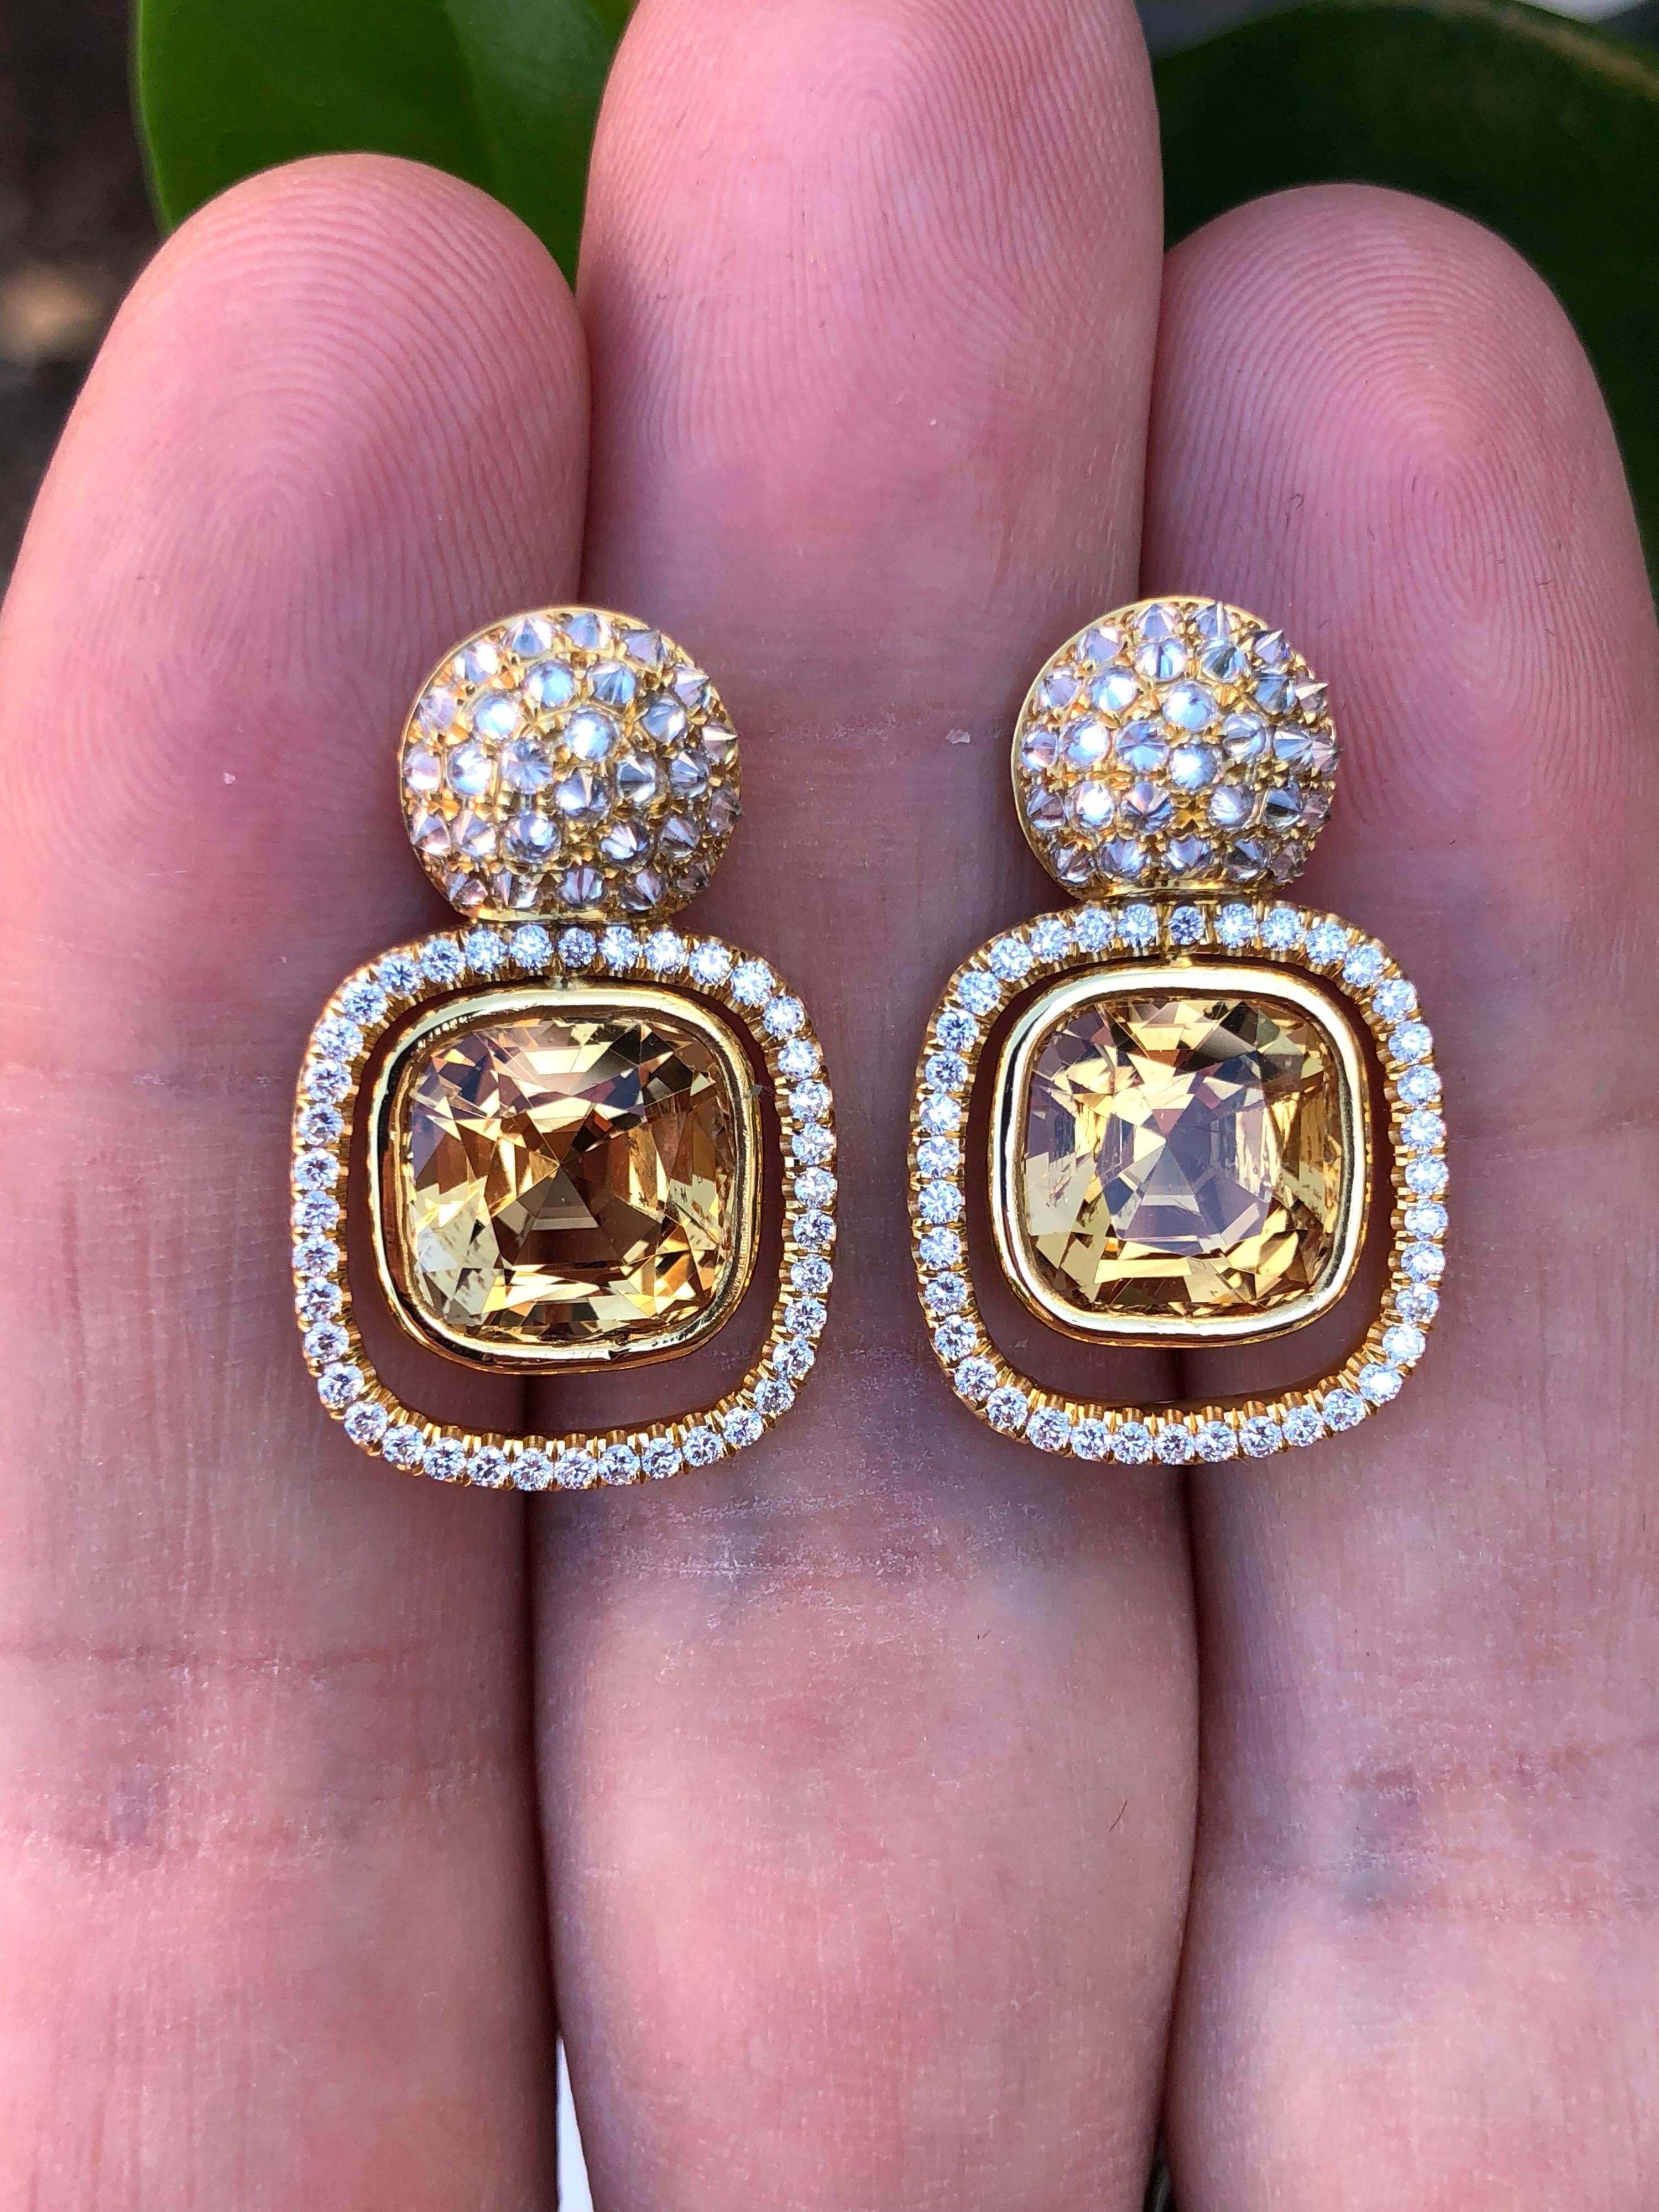 Natural Brazilian Imperial Yellow Topaz earrings, showcasing a superb pair of cushion cuts, 8.81 carats total, suspended from inversely -set, 1.63 carat total, round brilliant diamond earrings studs. 
Approximately 0.94 inches long and 0.59 inches